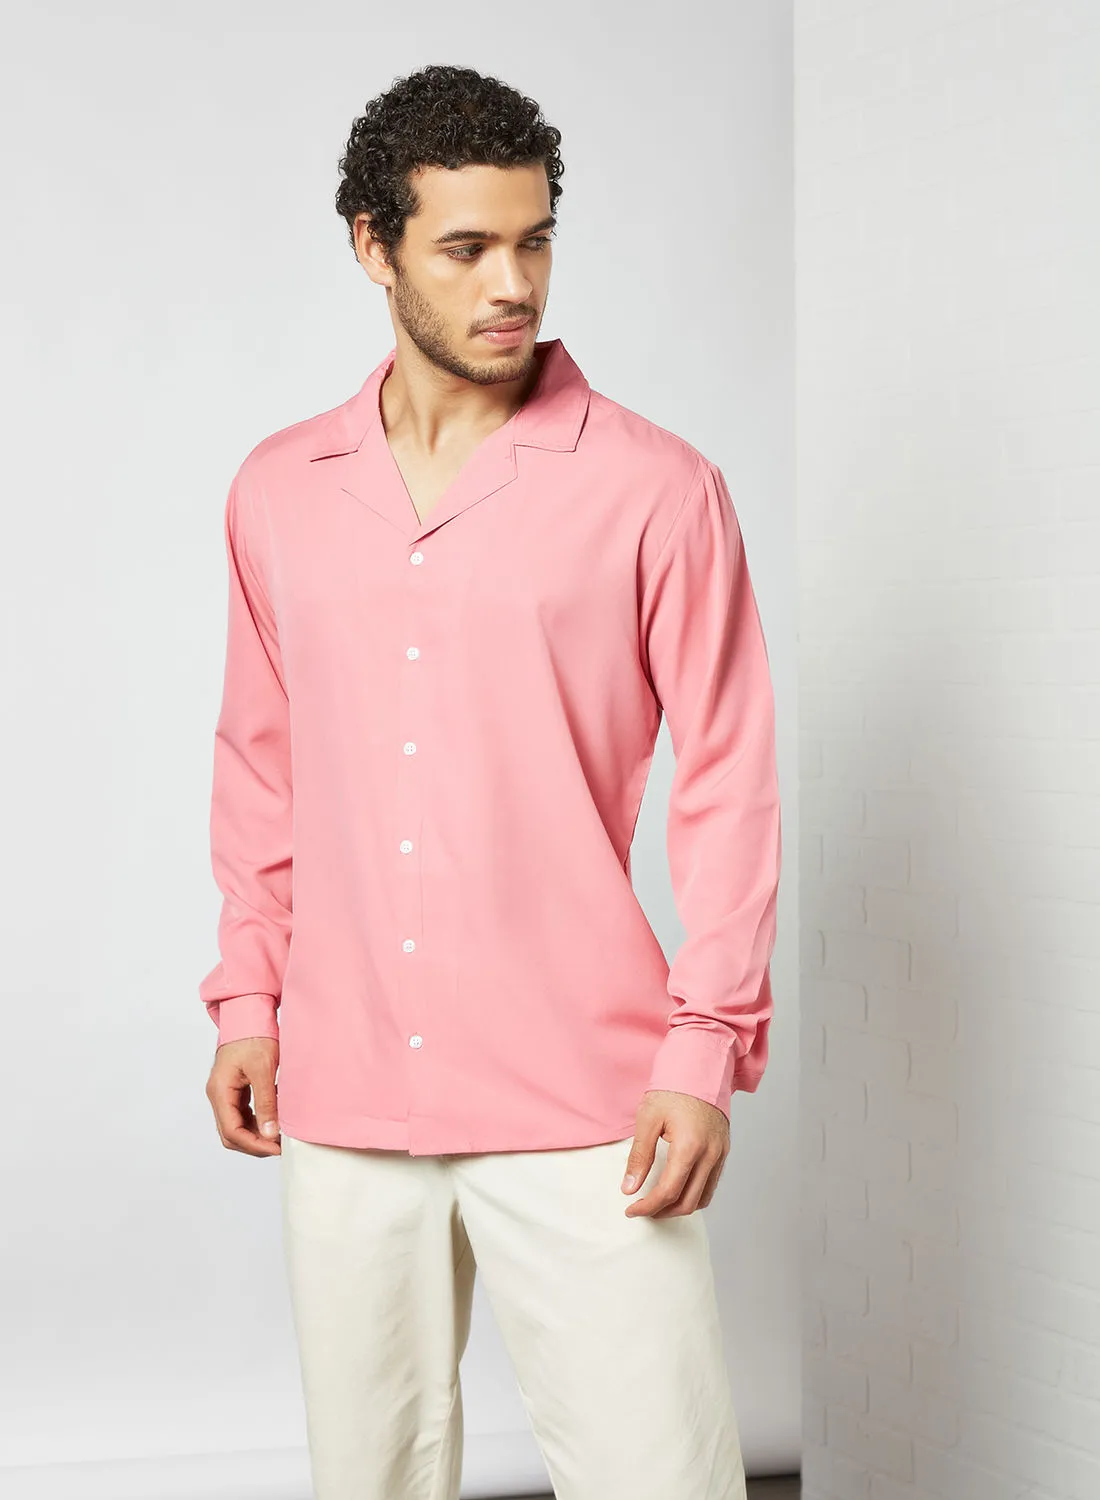 STATE 8 Casual Button Down Shirt Pink